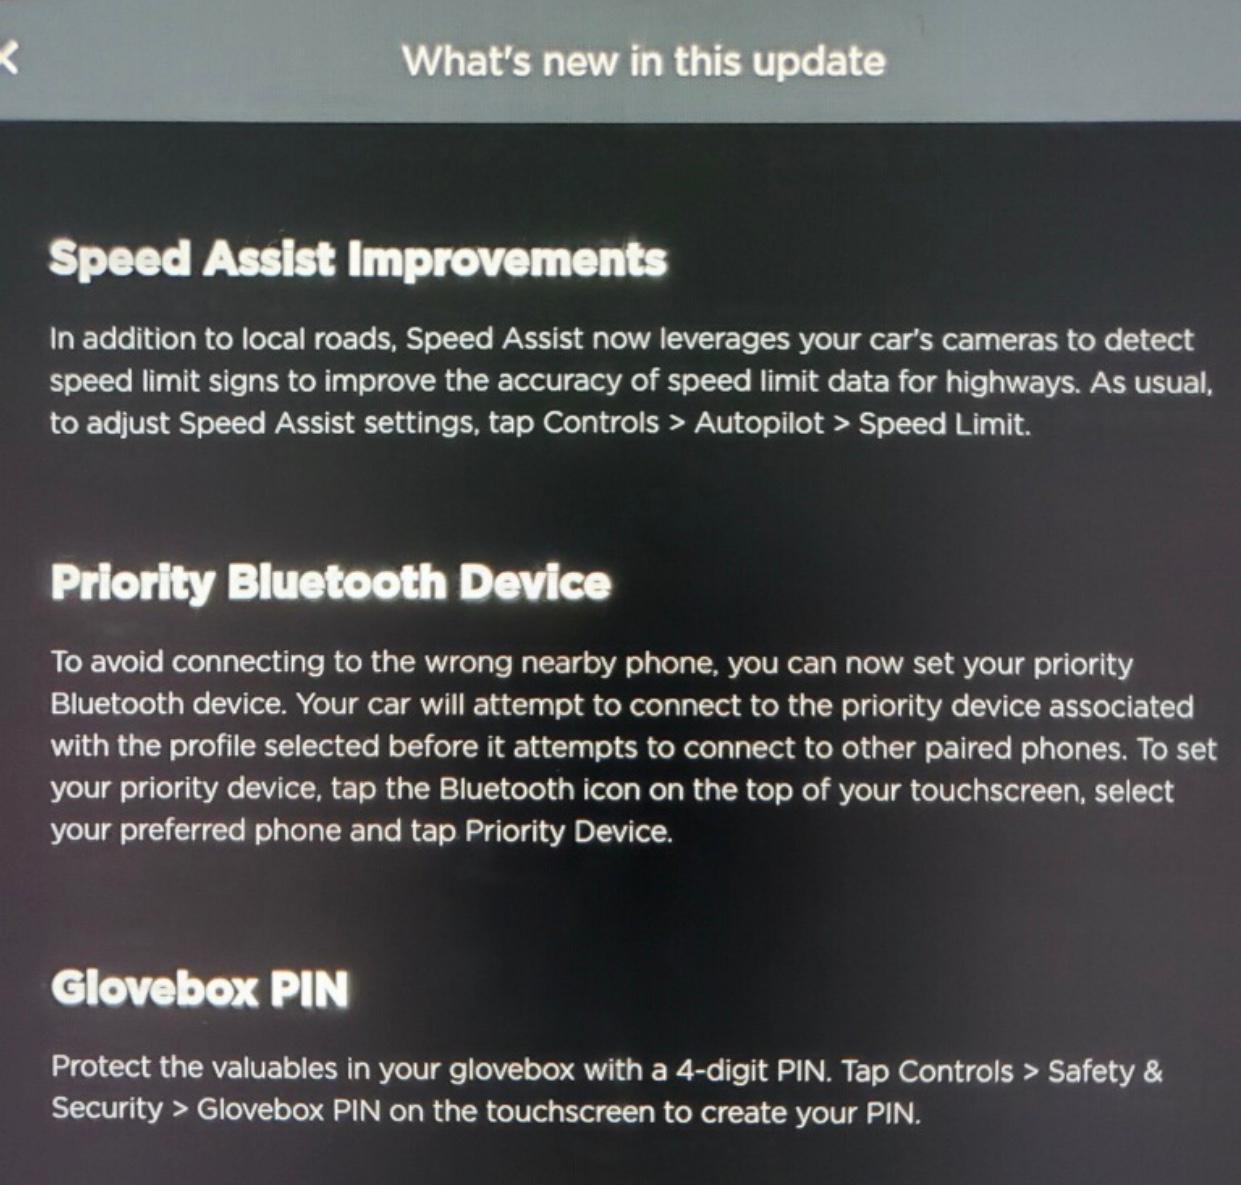 Tesla Releases OTA 2020.40.0.4 Software Update With Glovebox PIN, Charge Port Inlet Heater & More